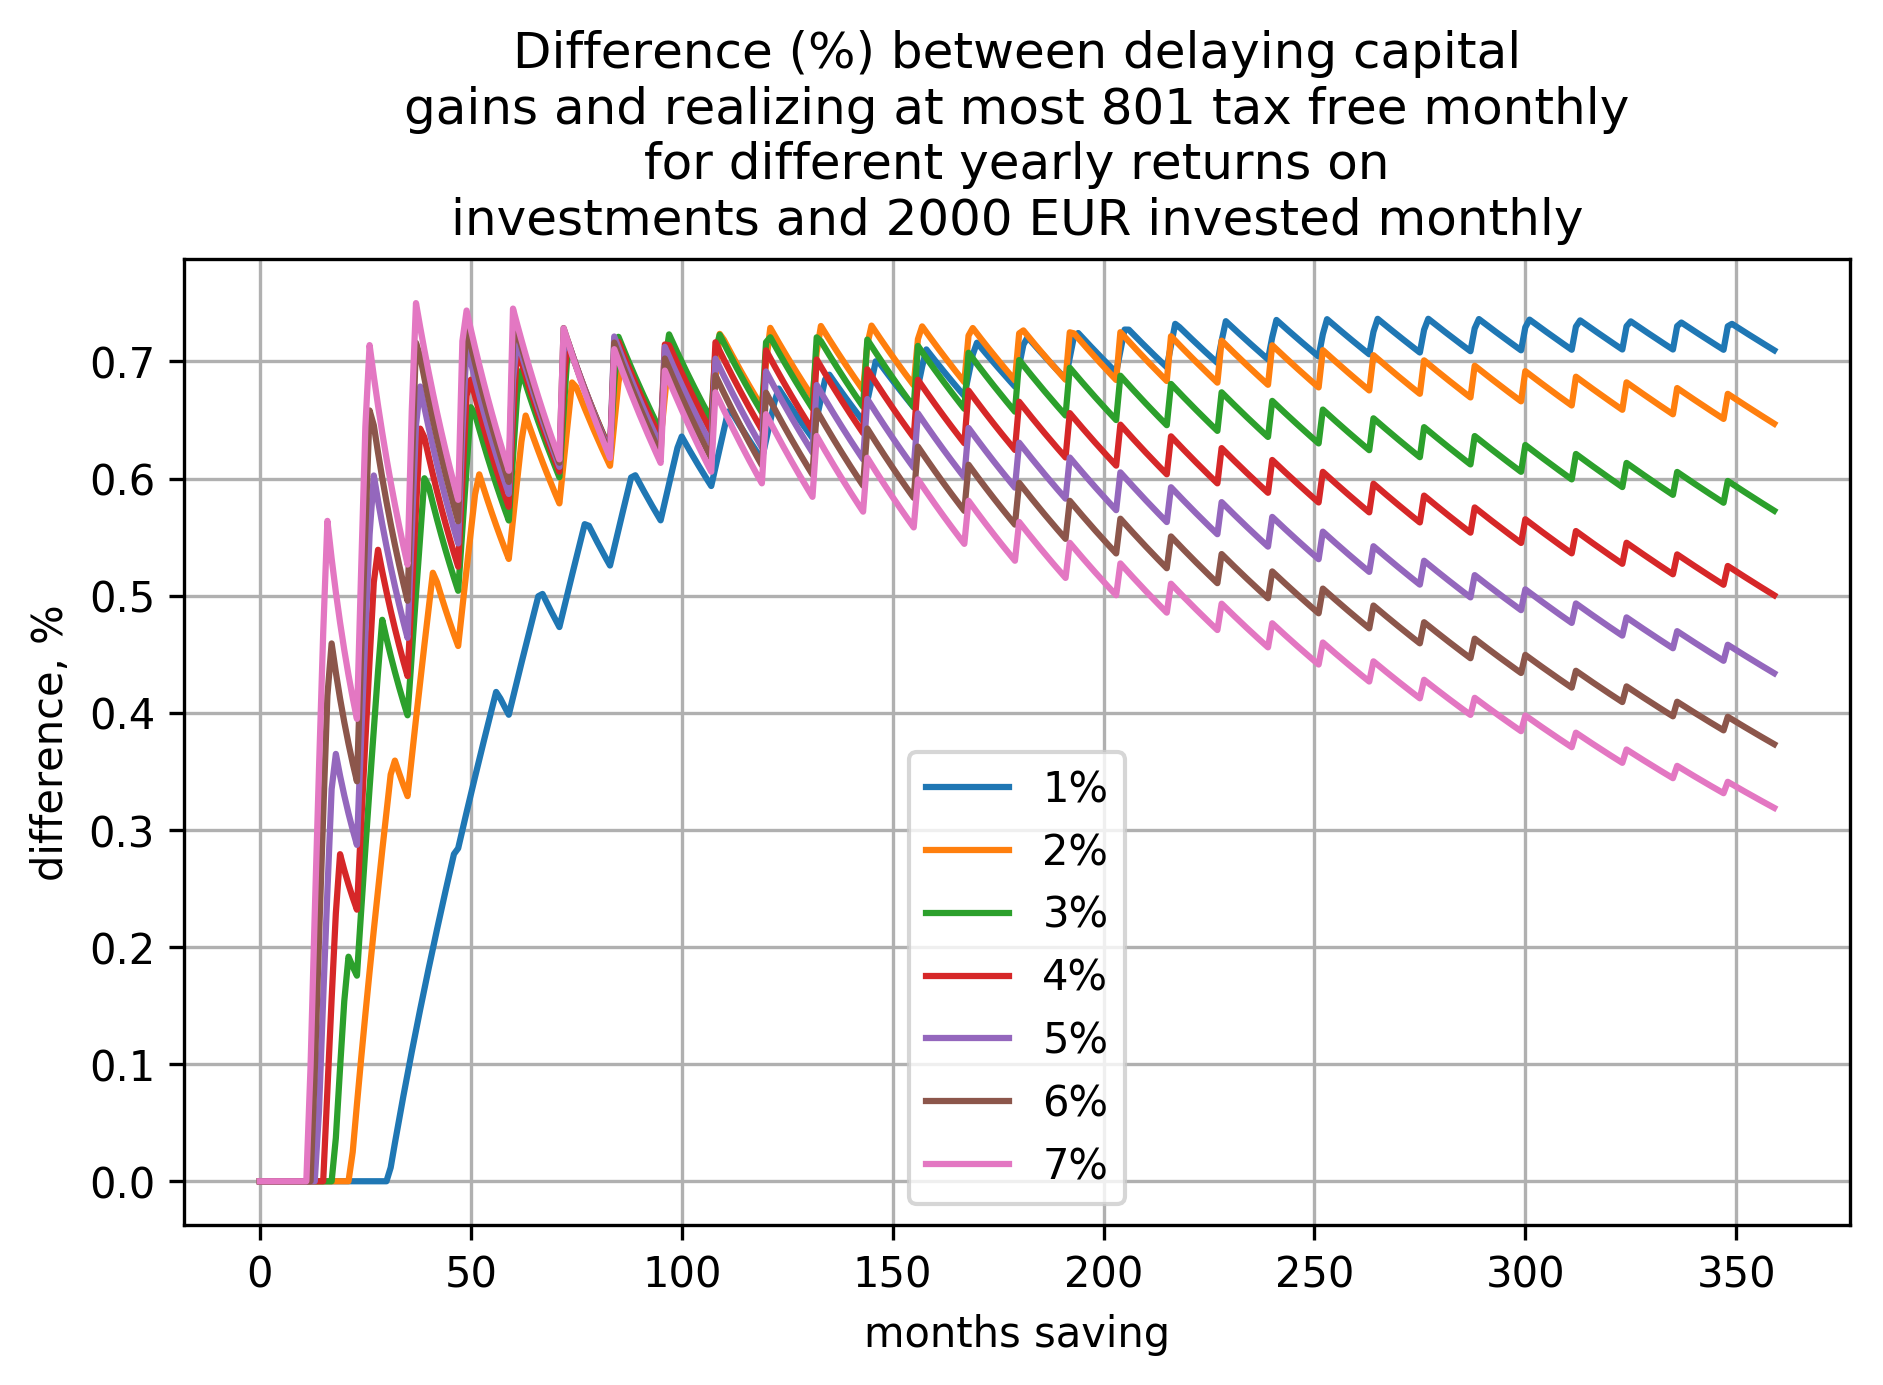 a plot showing how difference (in percents) between the two cases (delaying capital gains and
realizing at most 801€ tax free yearly) depends on time saving and yearly return on
investment when investing 2000€ per month